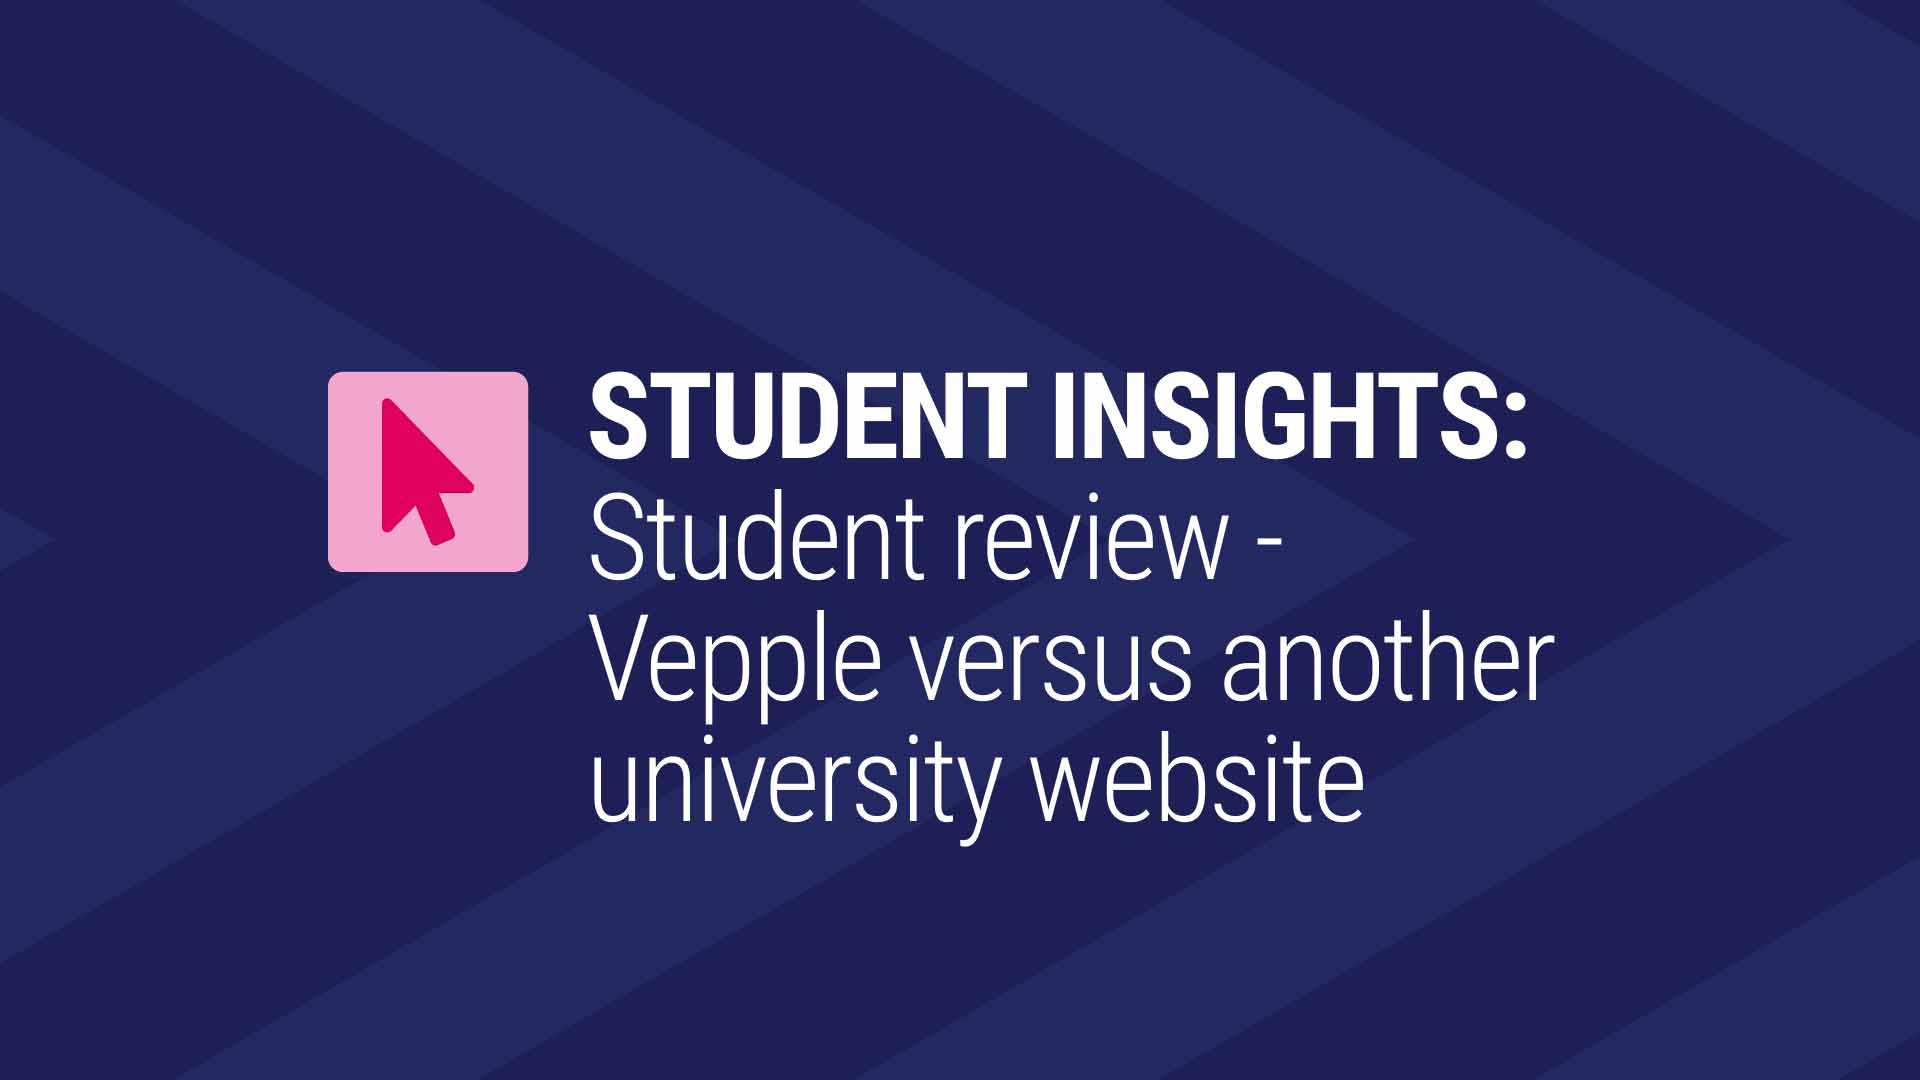 Card image for "22 - Student Insights: Review Website"